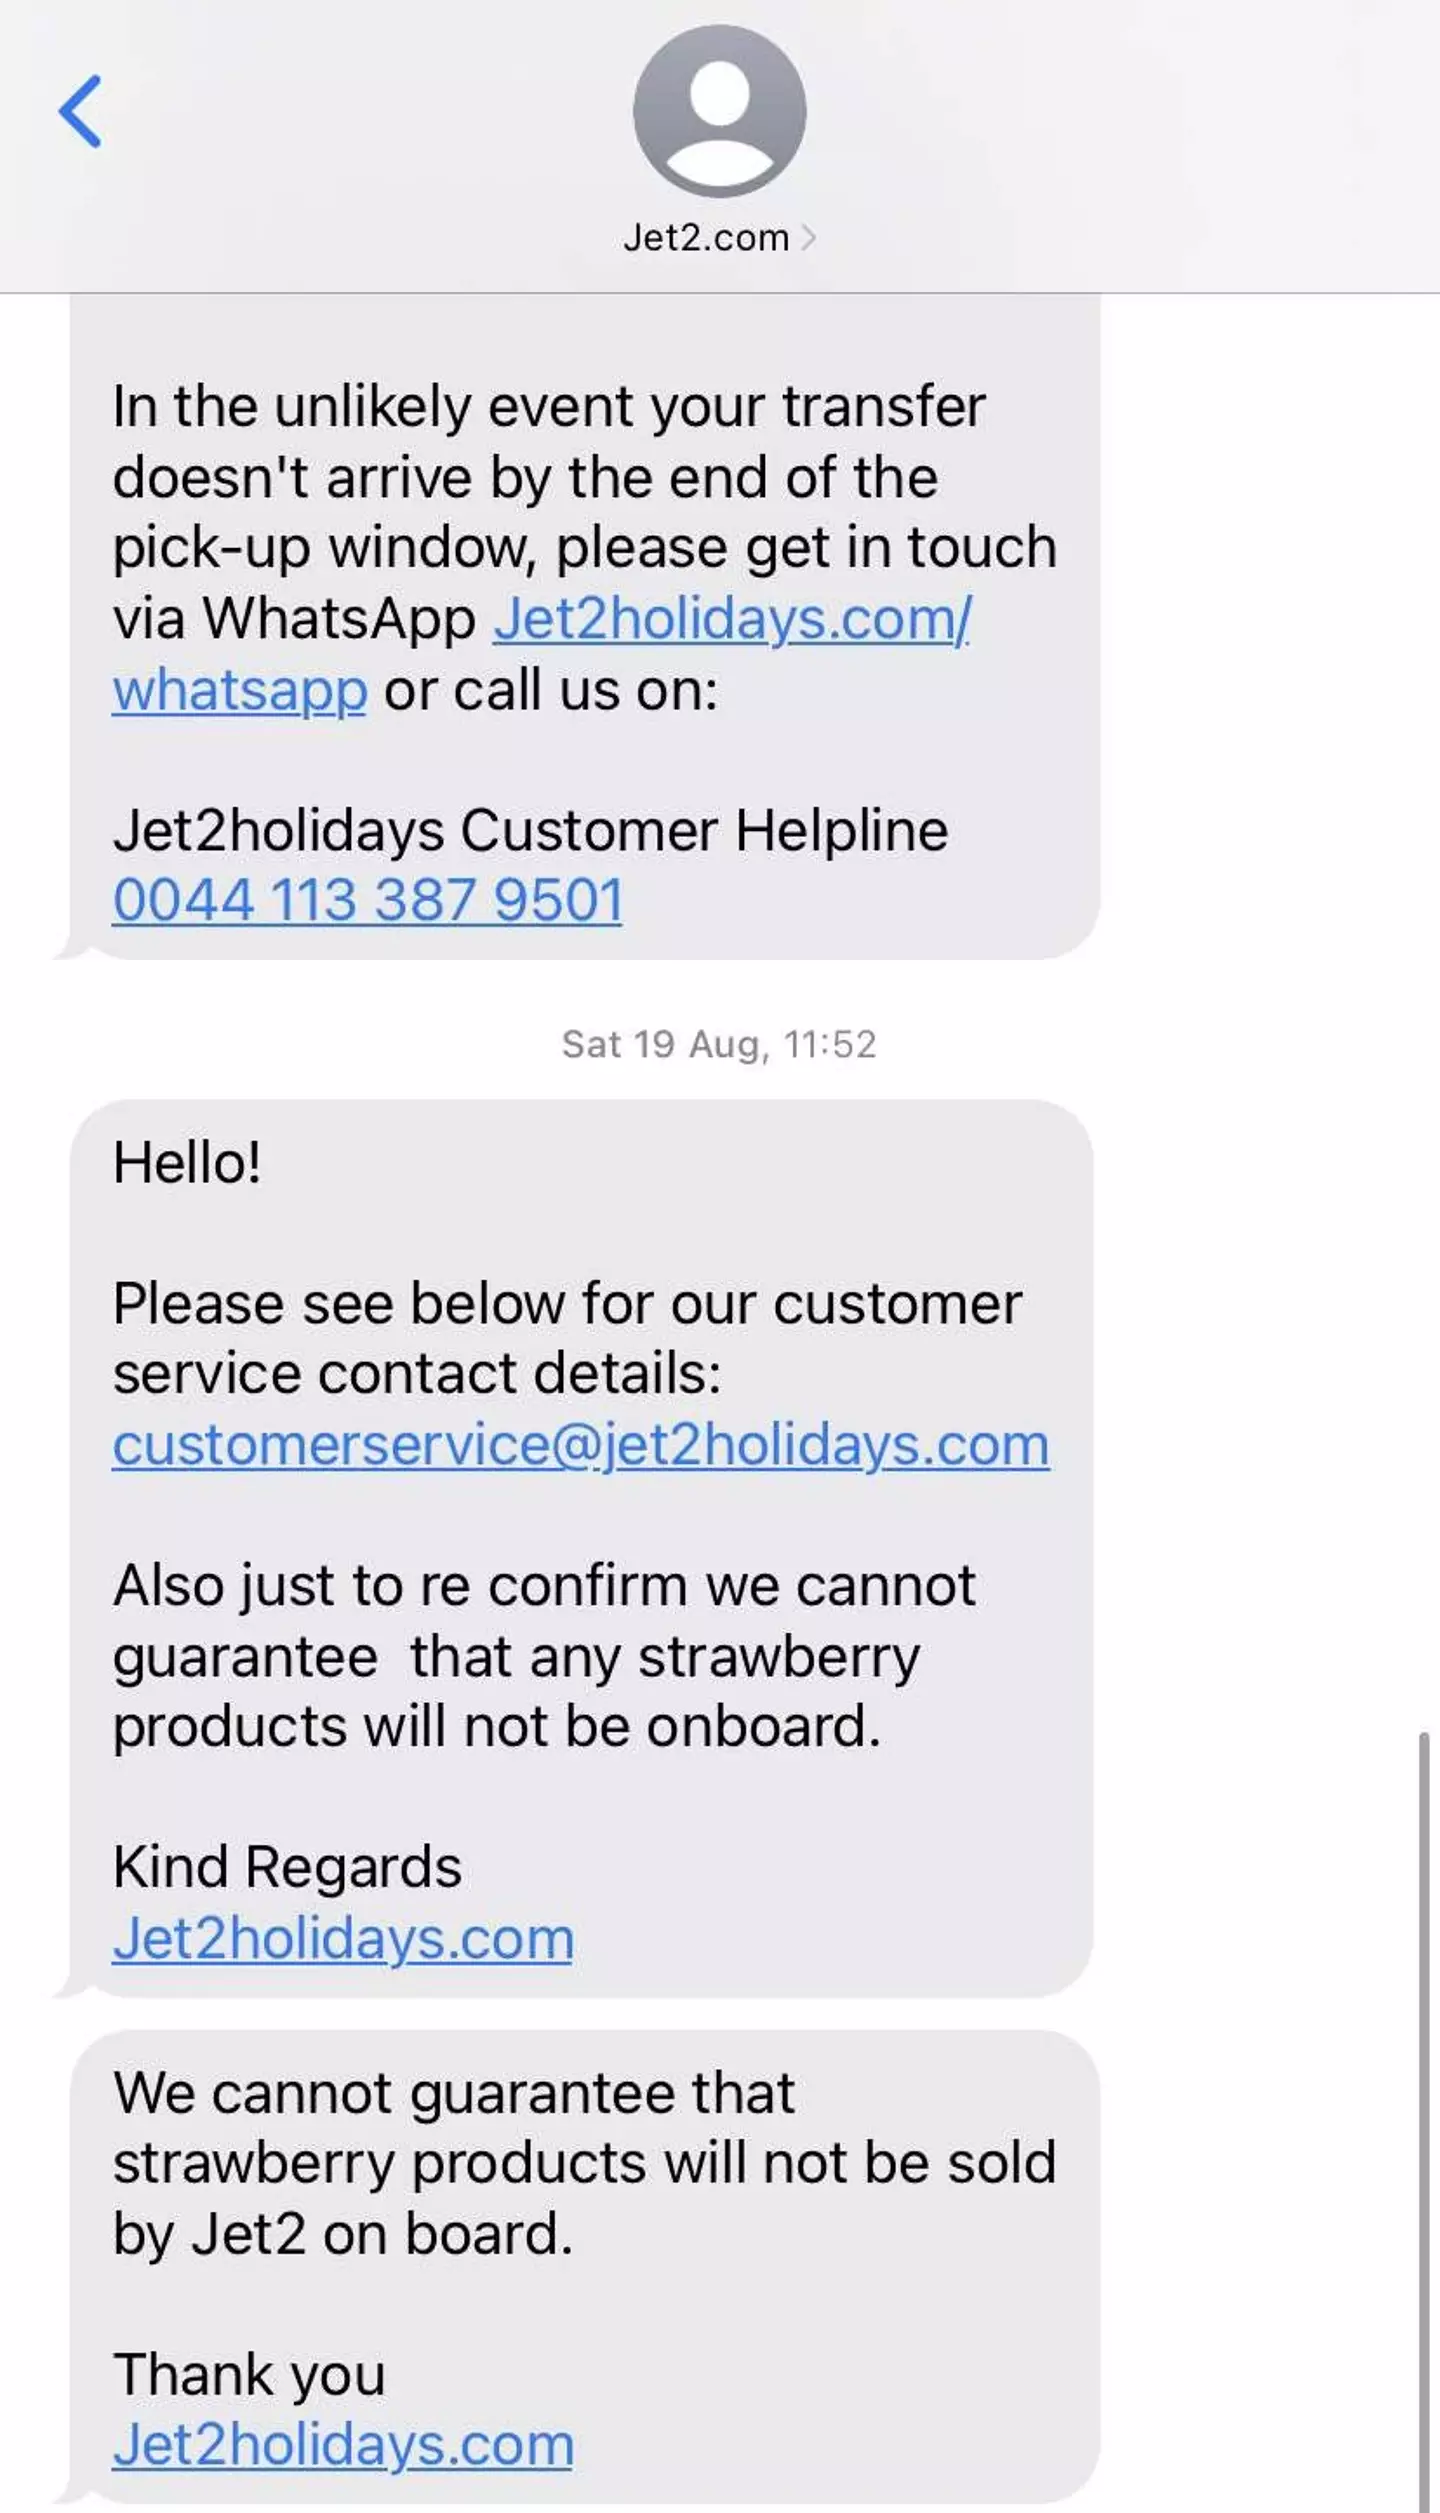 The text response from Jet2.